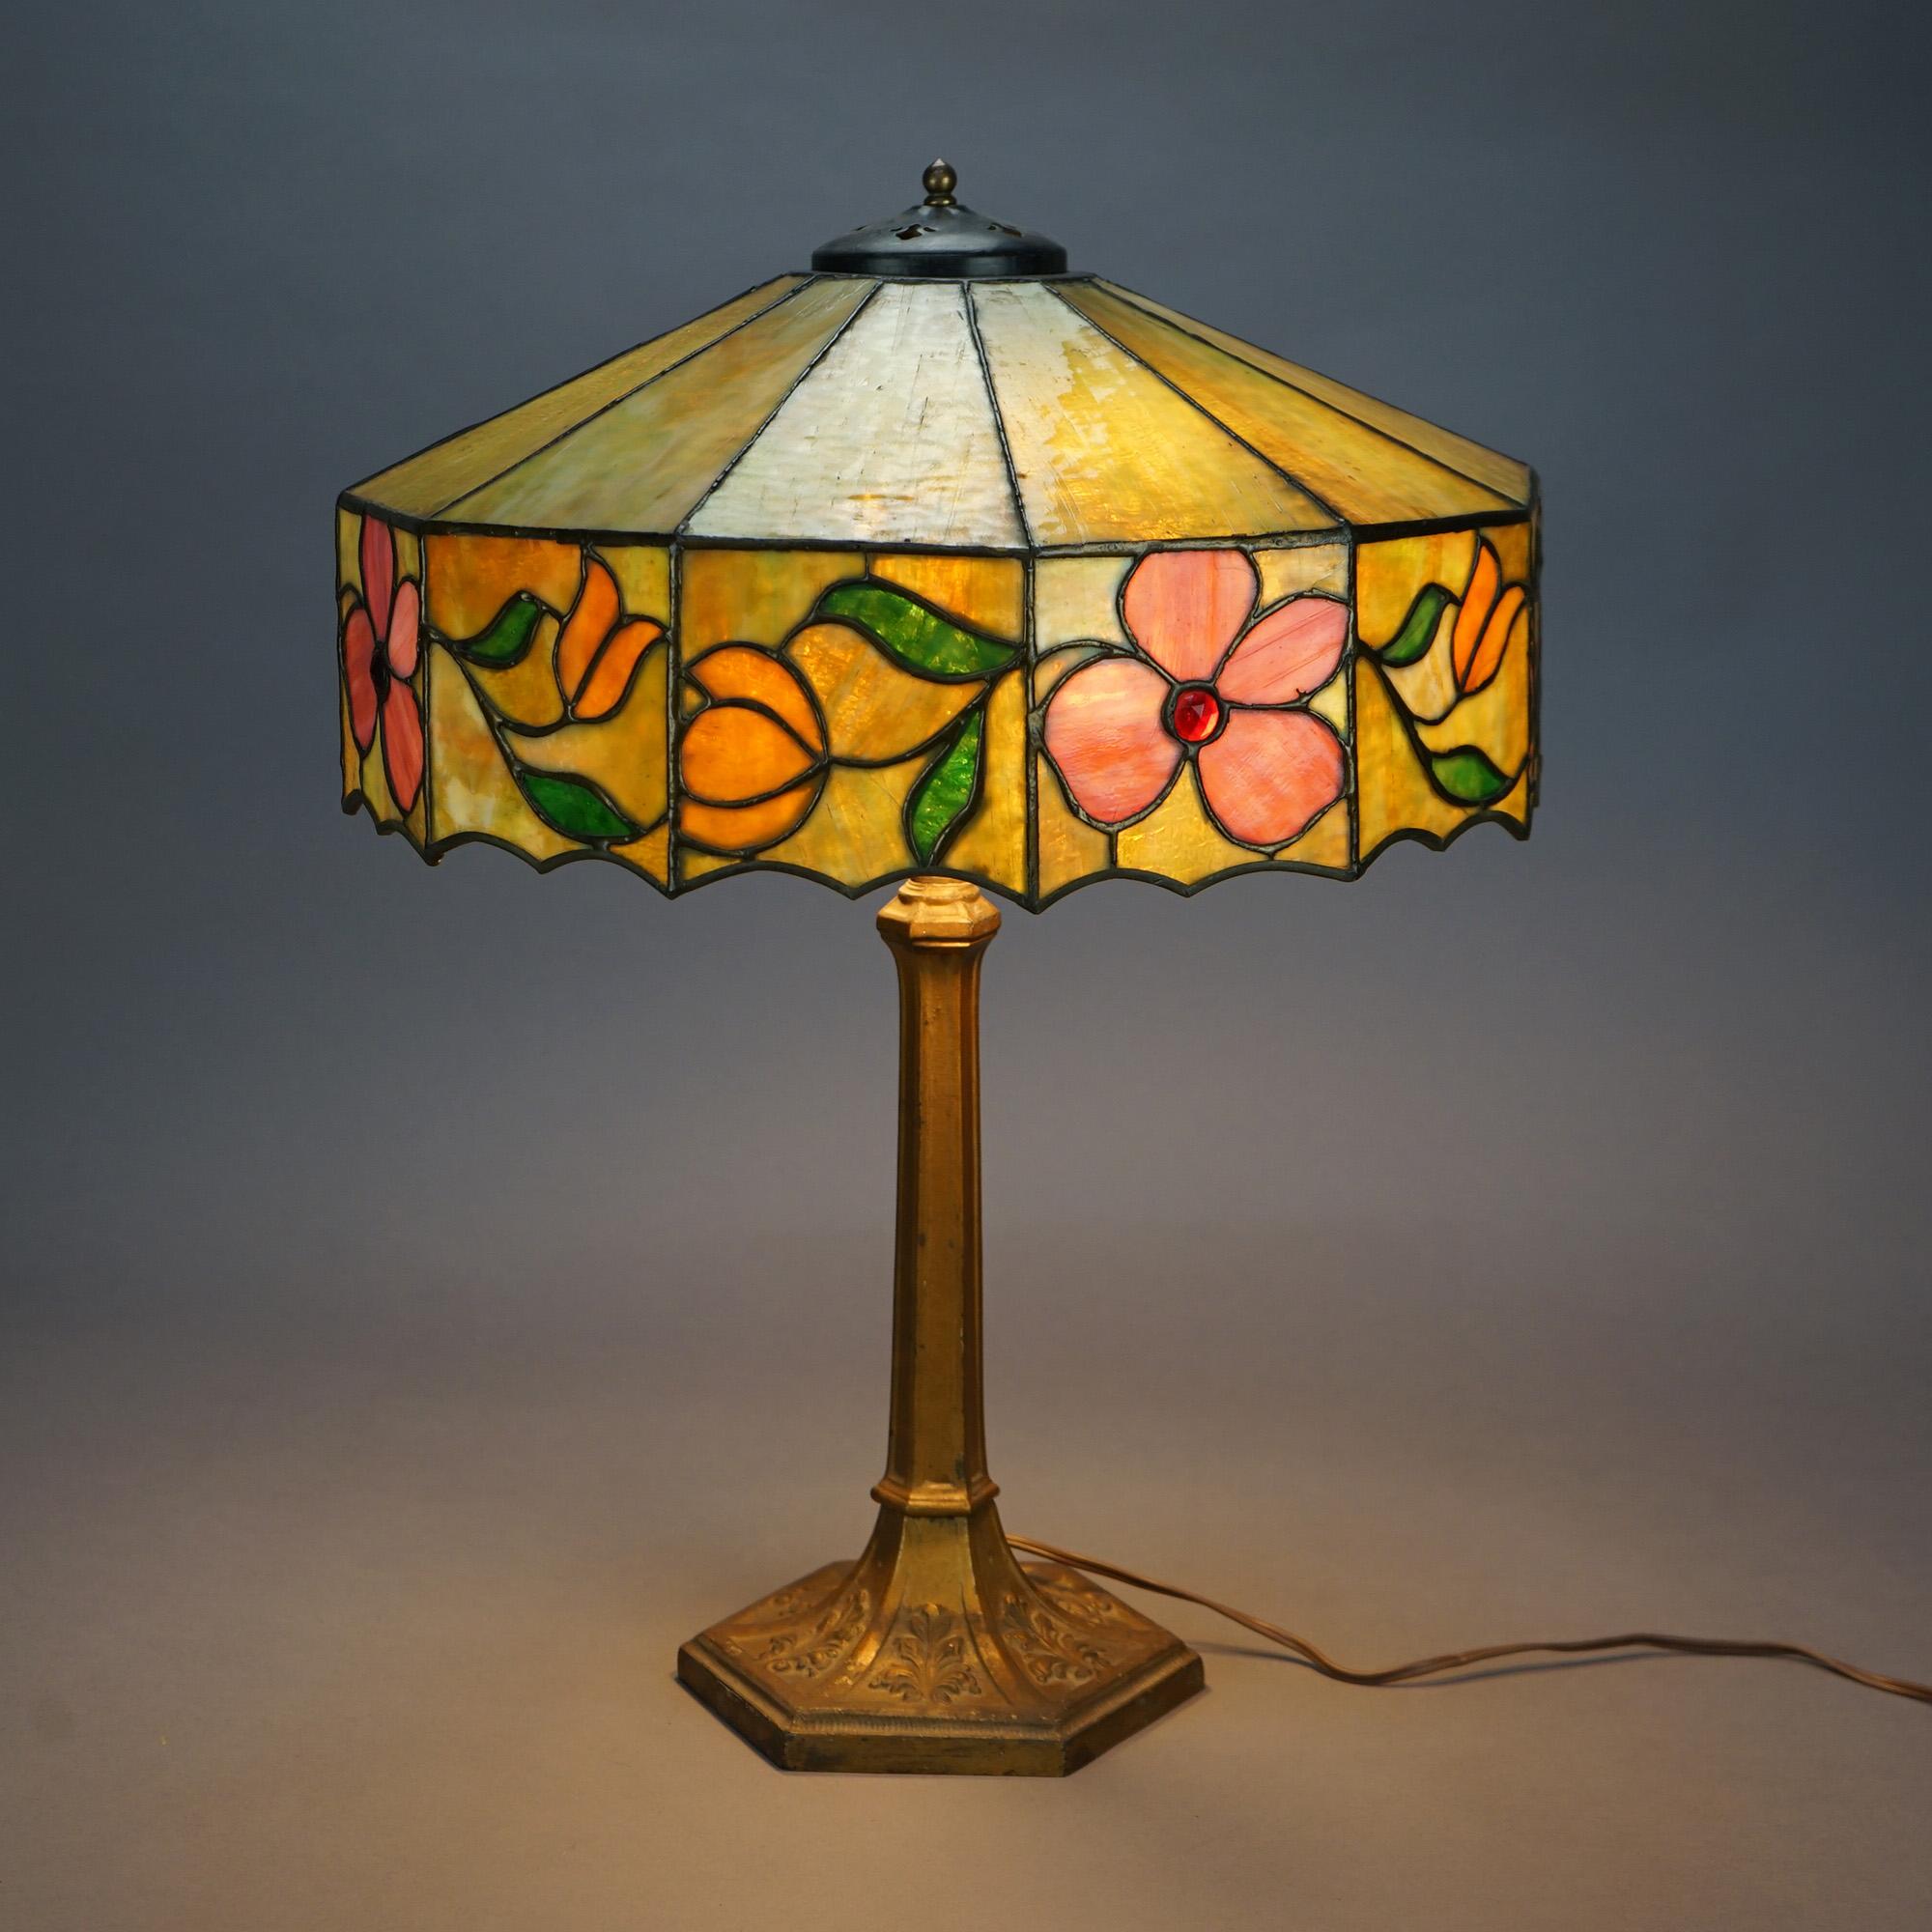 American Antique Arts & Crafts Floral Jeweled & Leaded Slag Glass Table Lamp, Circa 1920